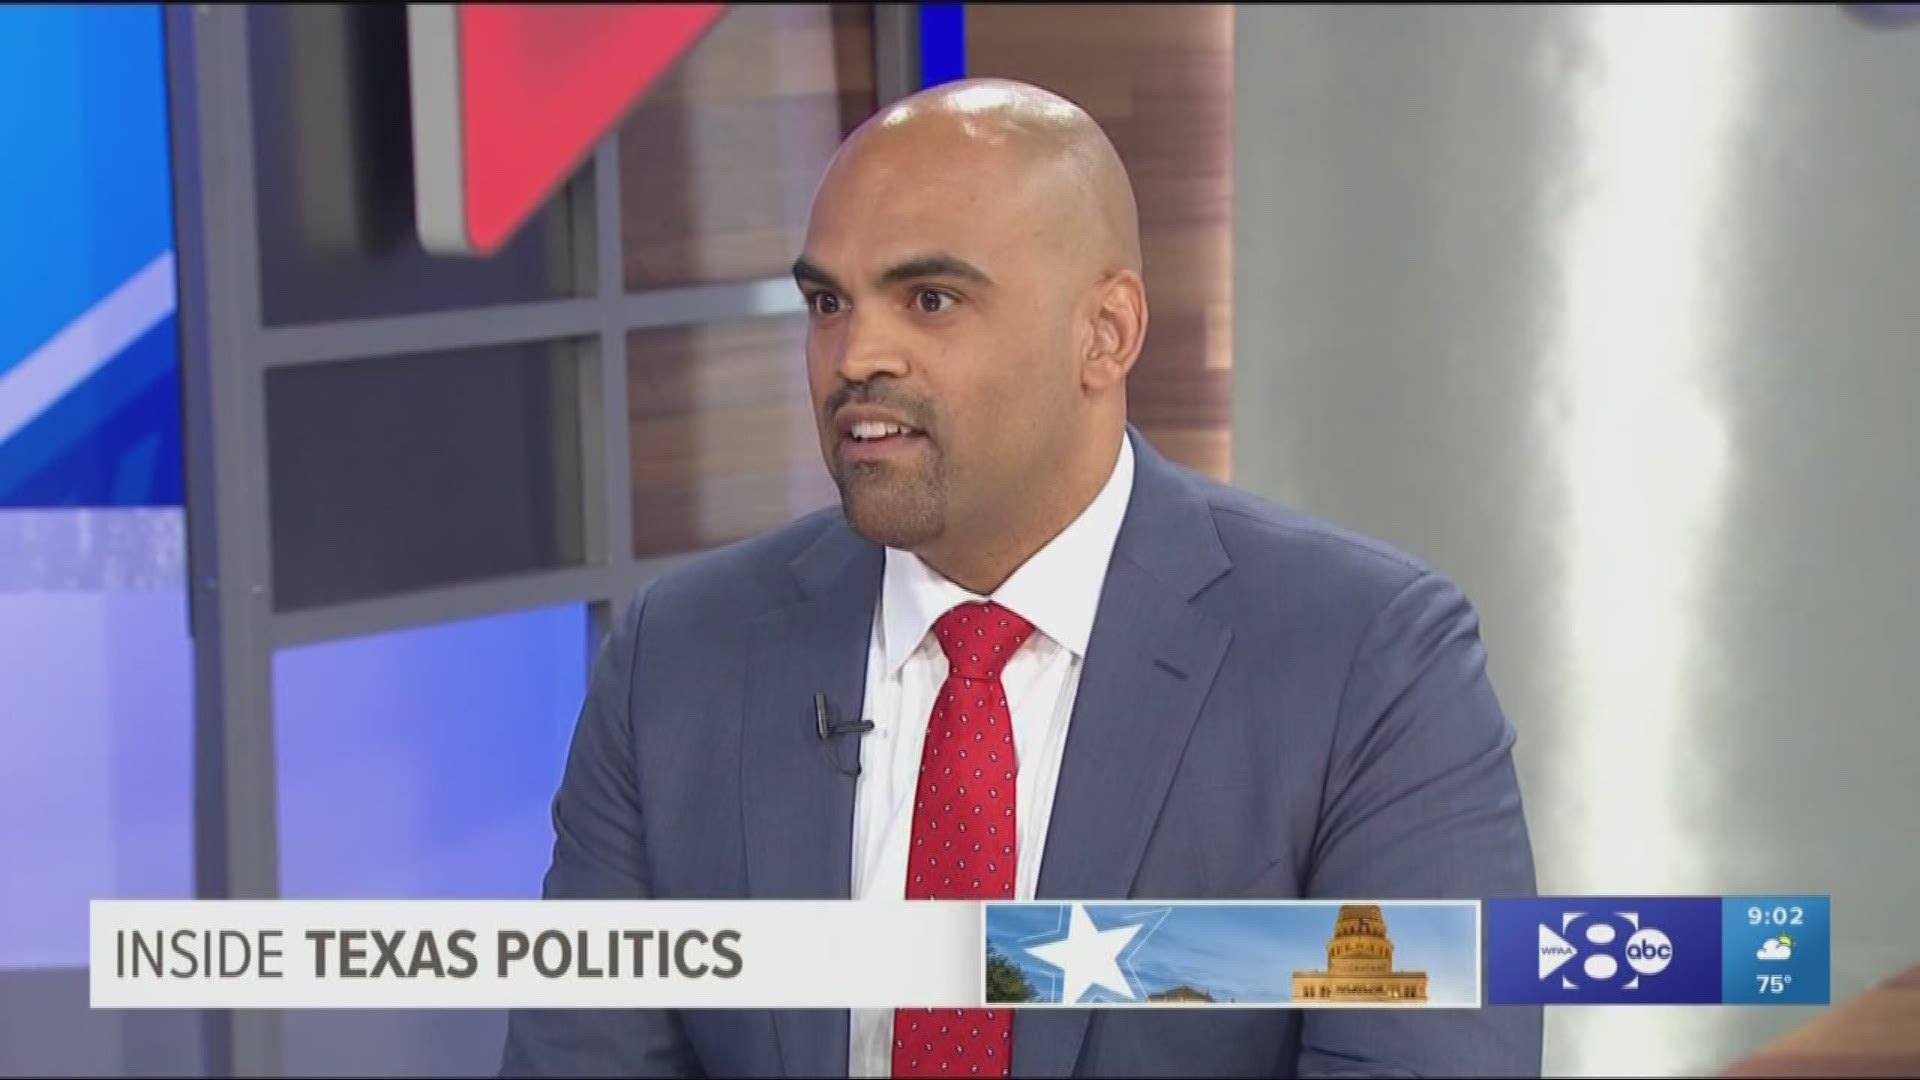 Democratic Challenger Colin Allred is trying to knock off incumbent Republican Pete Sessions. In a recent interview with Jason Whitely and Bud Kennedy of the Star-Telegram, Allred talked about why the race is close.